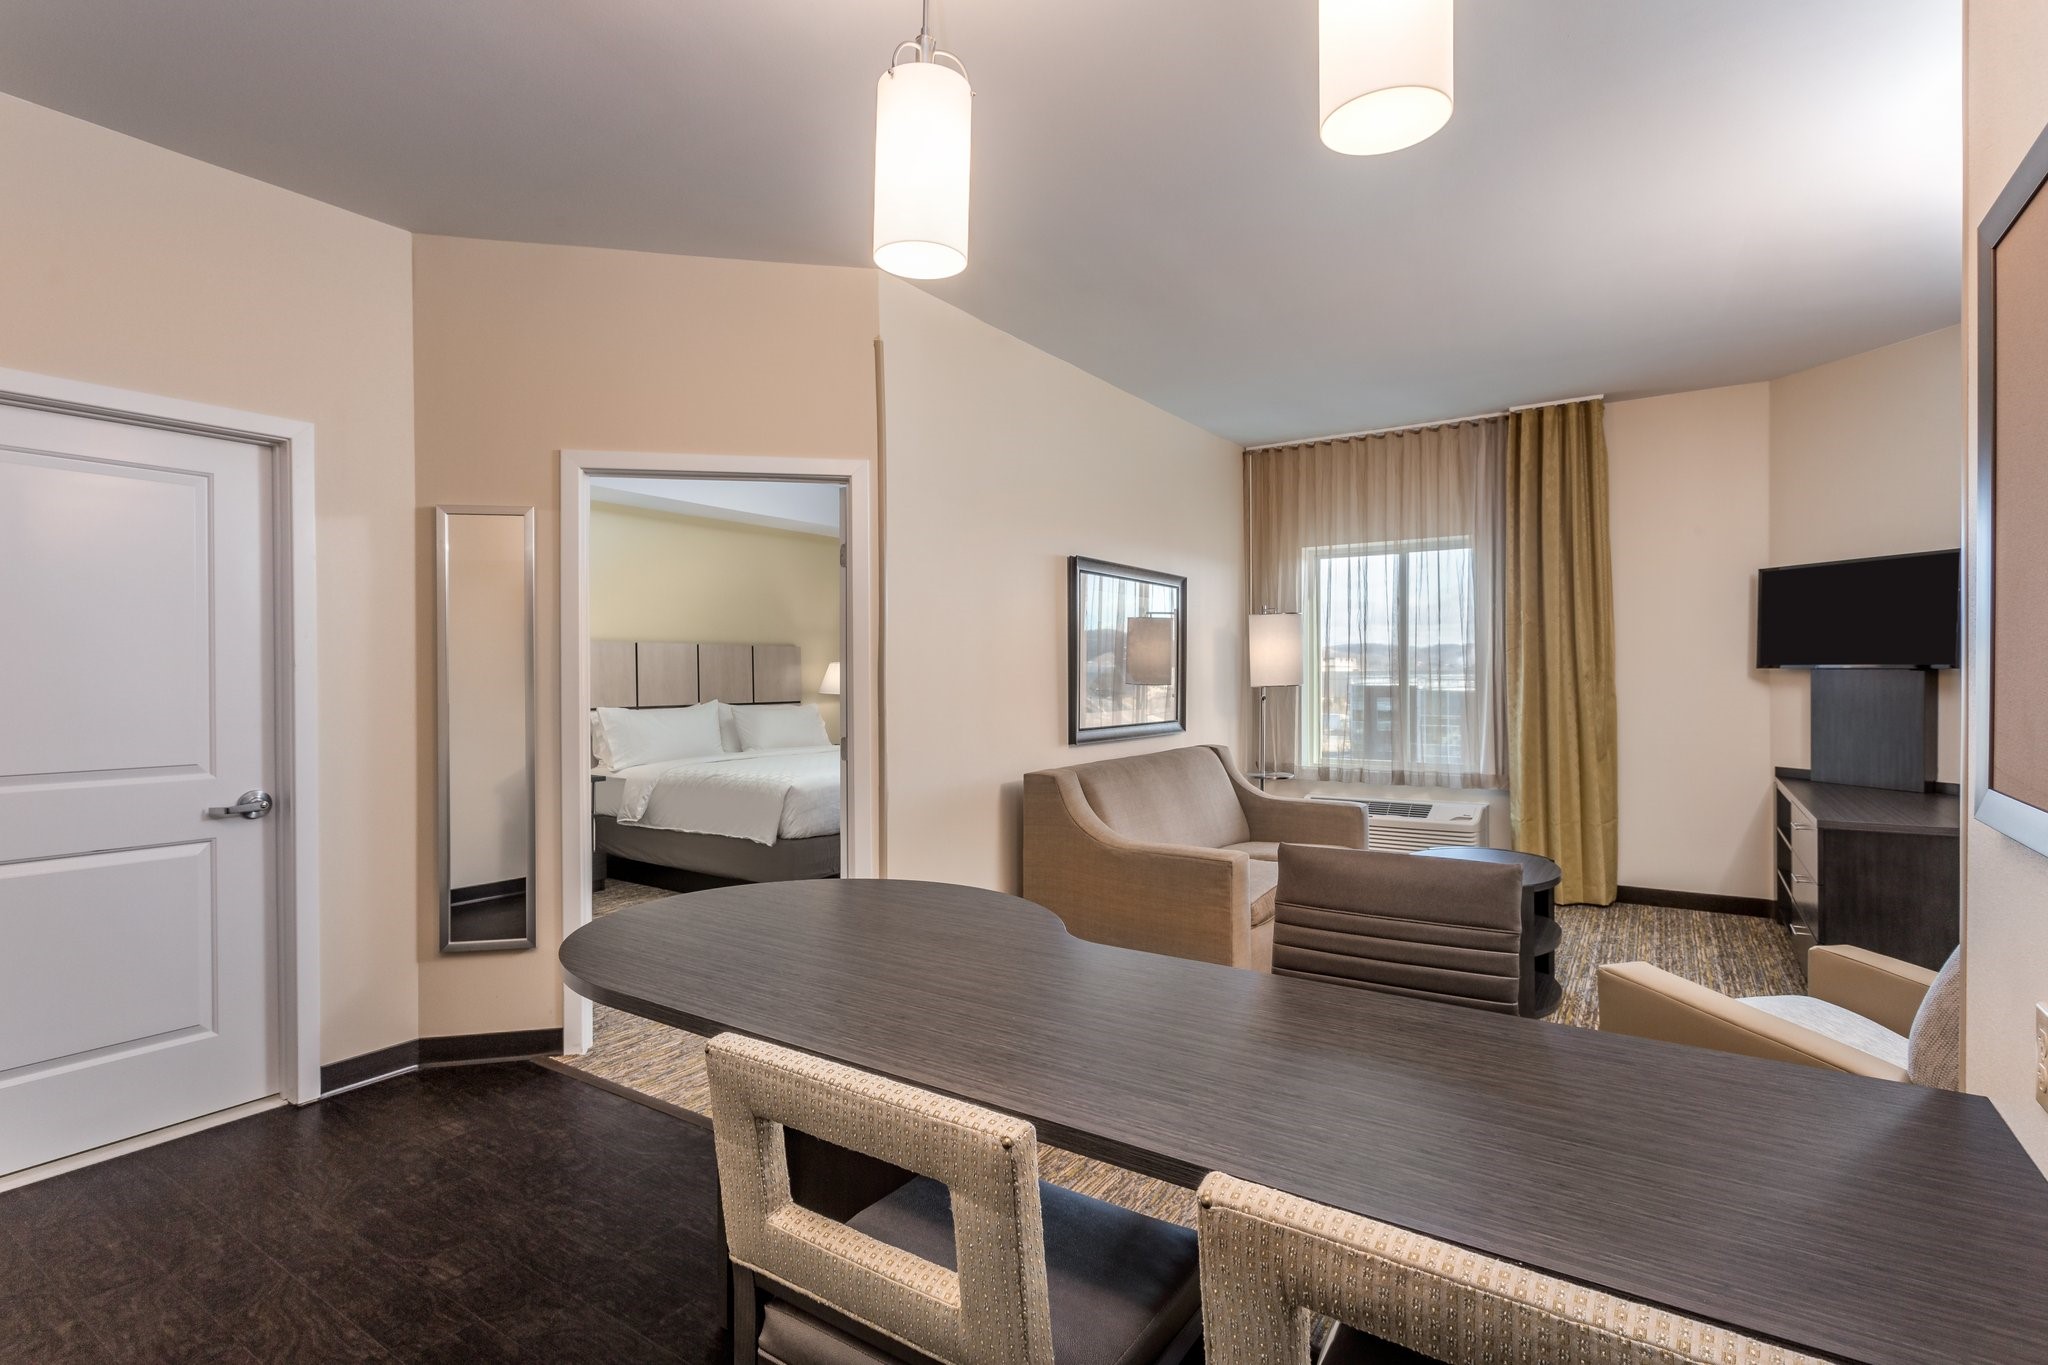 Meeting Rooms at Candlewood Suites BETHLEHEM SOUTH, 1630 SPILLMAN DRIVE